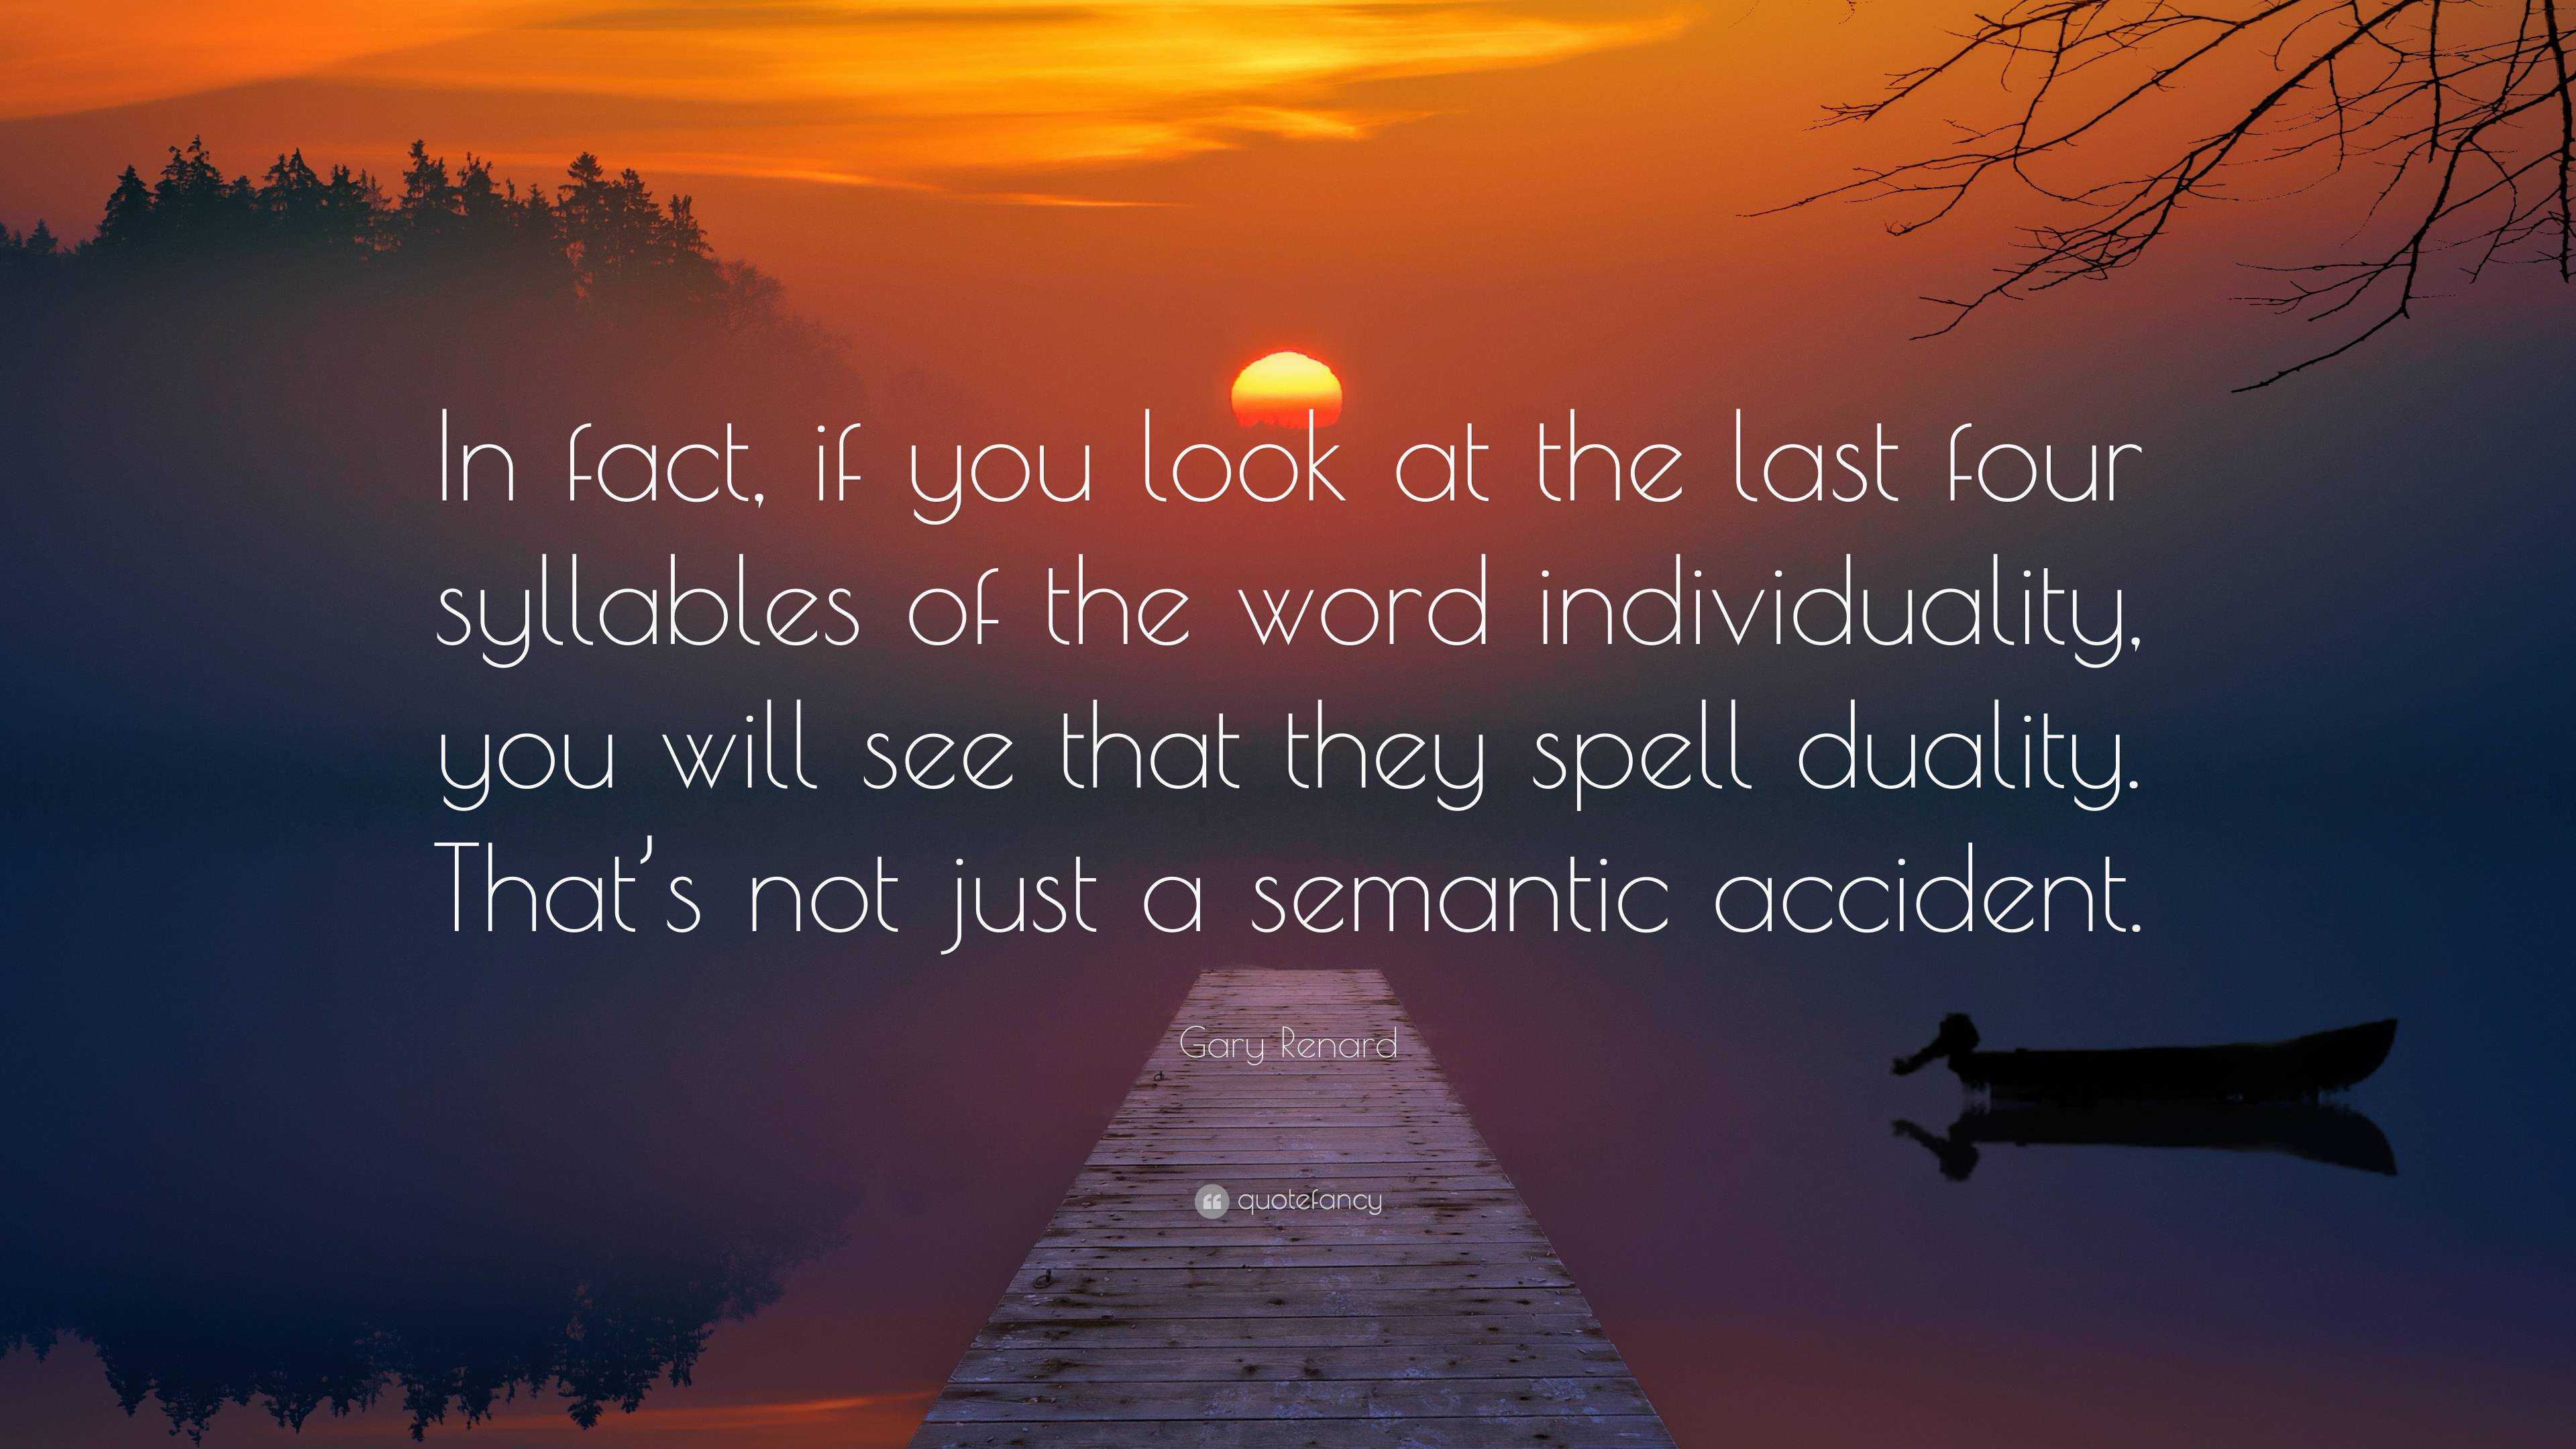 Gary Renard Quote: “In fact, if you look at the last four syllables of ...